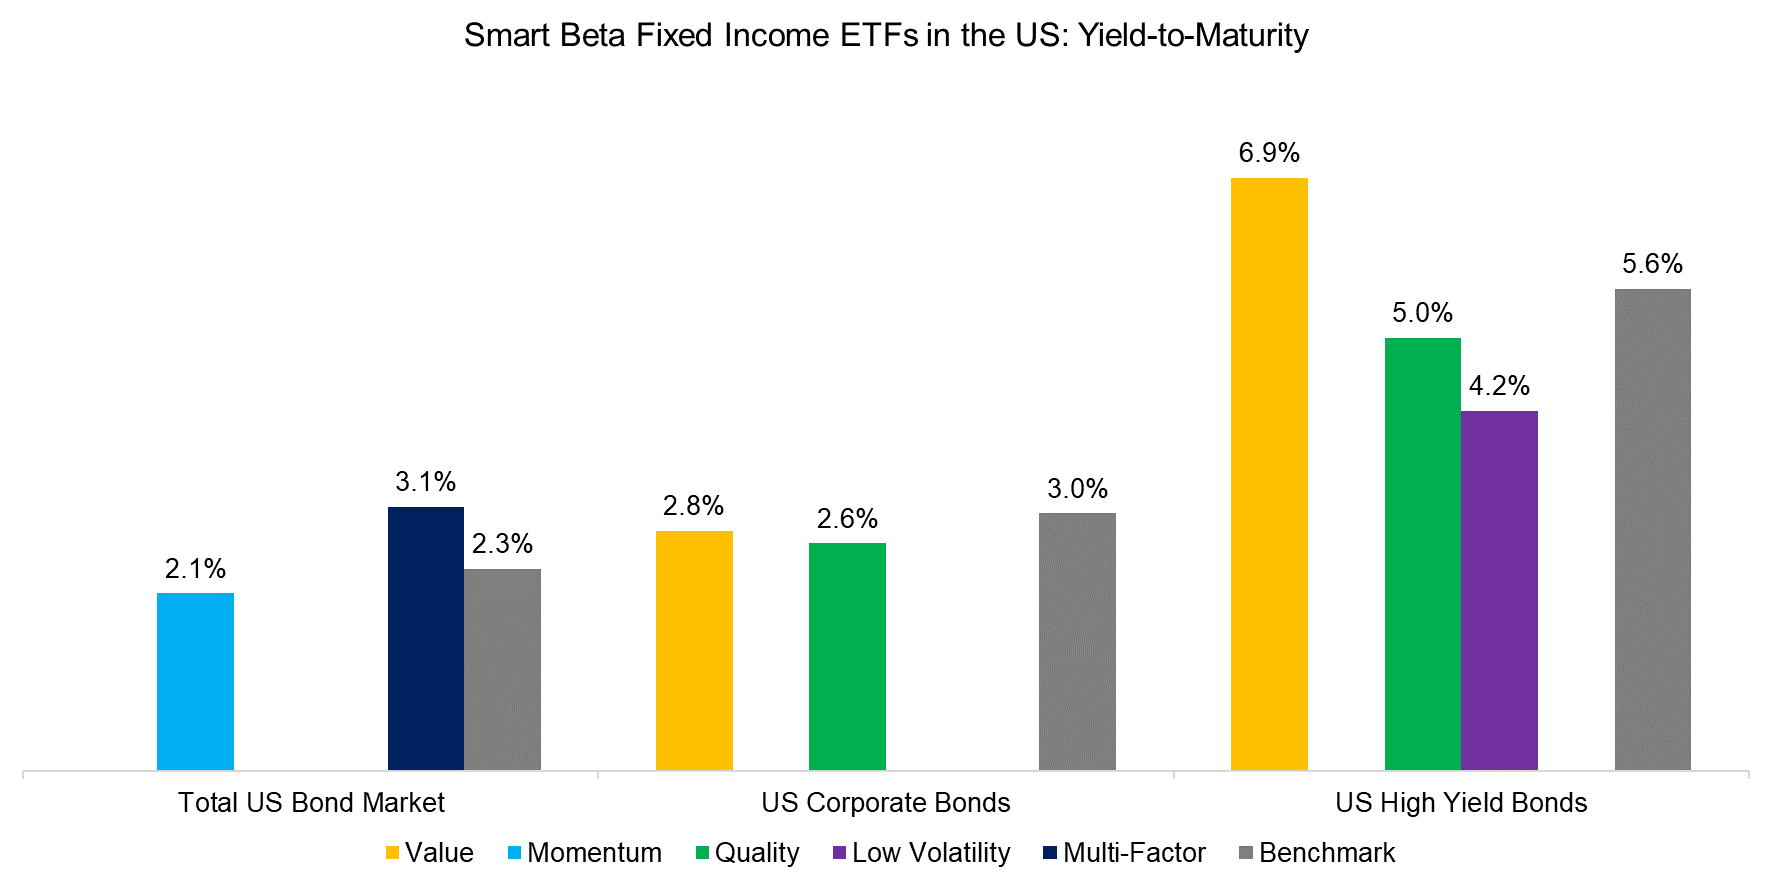 Smart Beta Fixed Income ETFs in the US Yield-to-Maturity